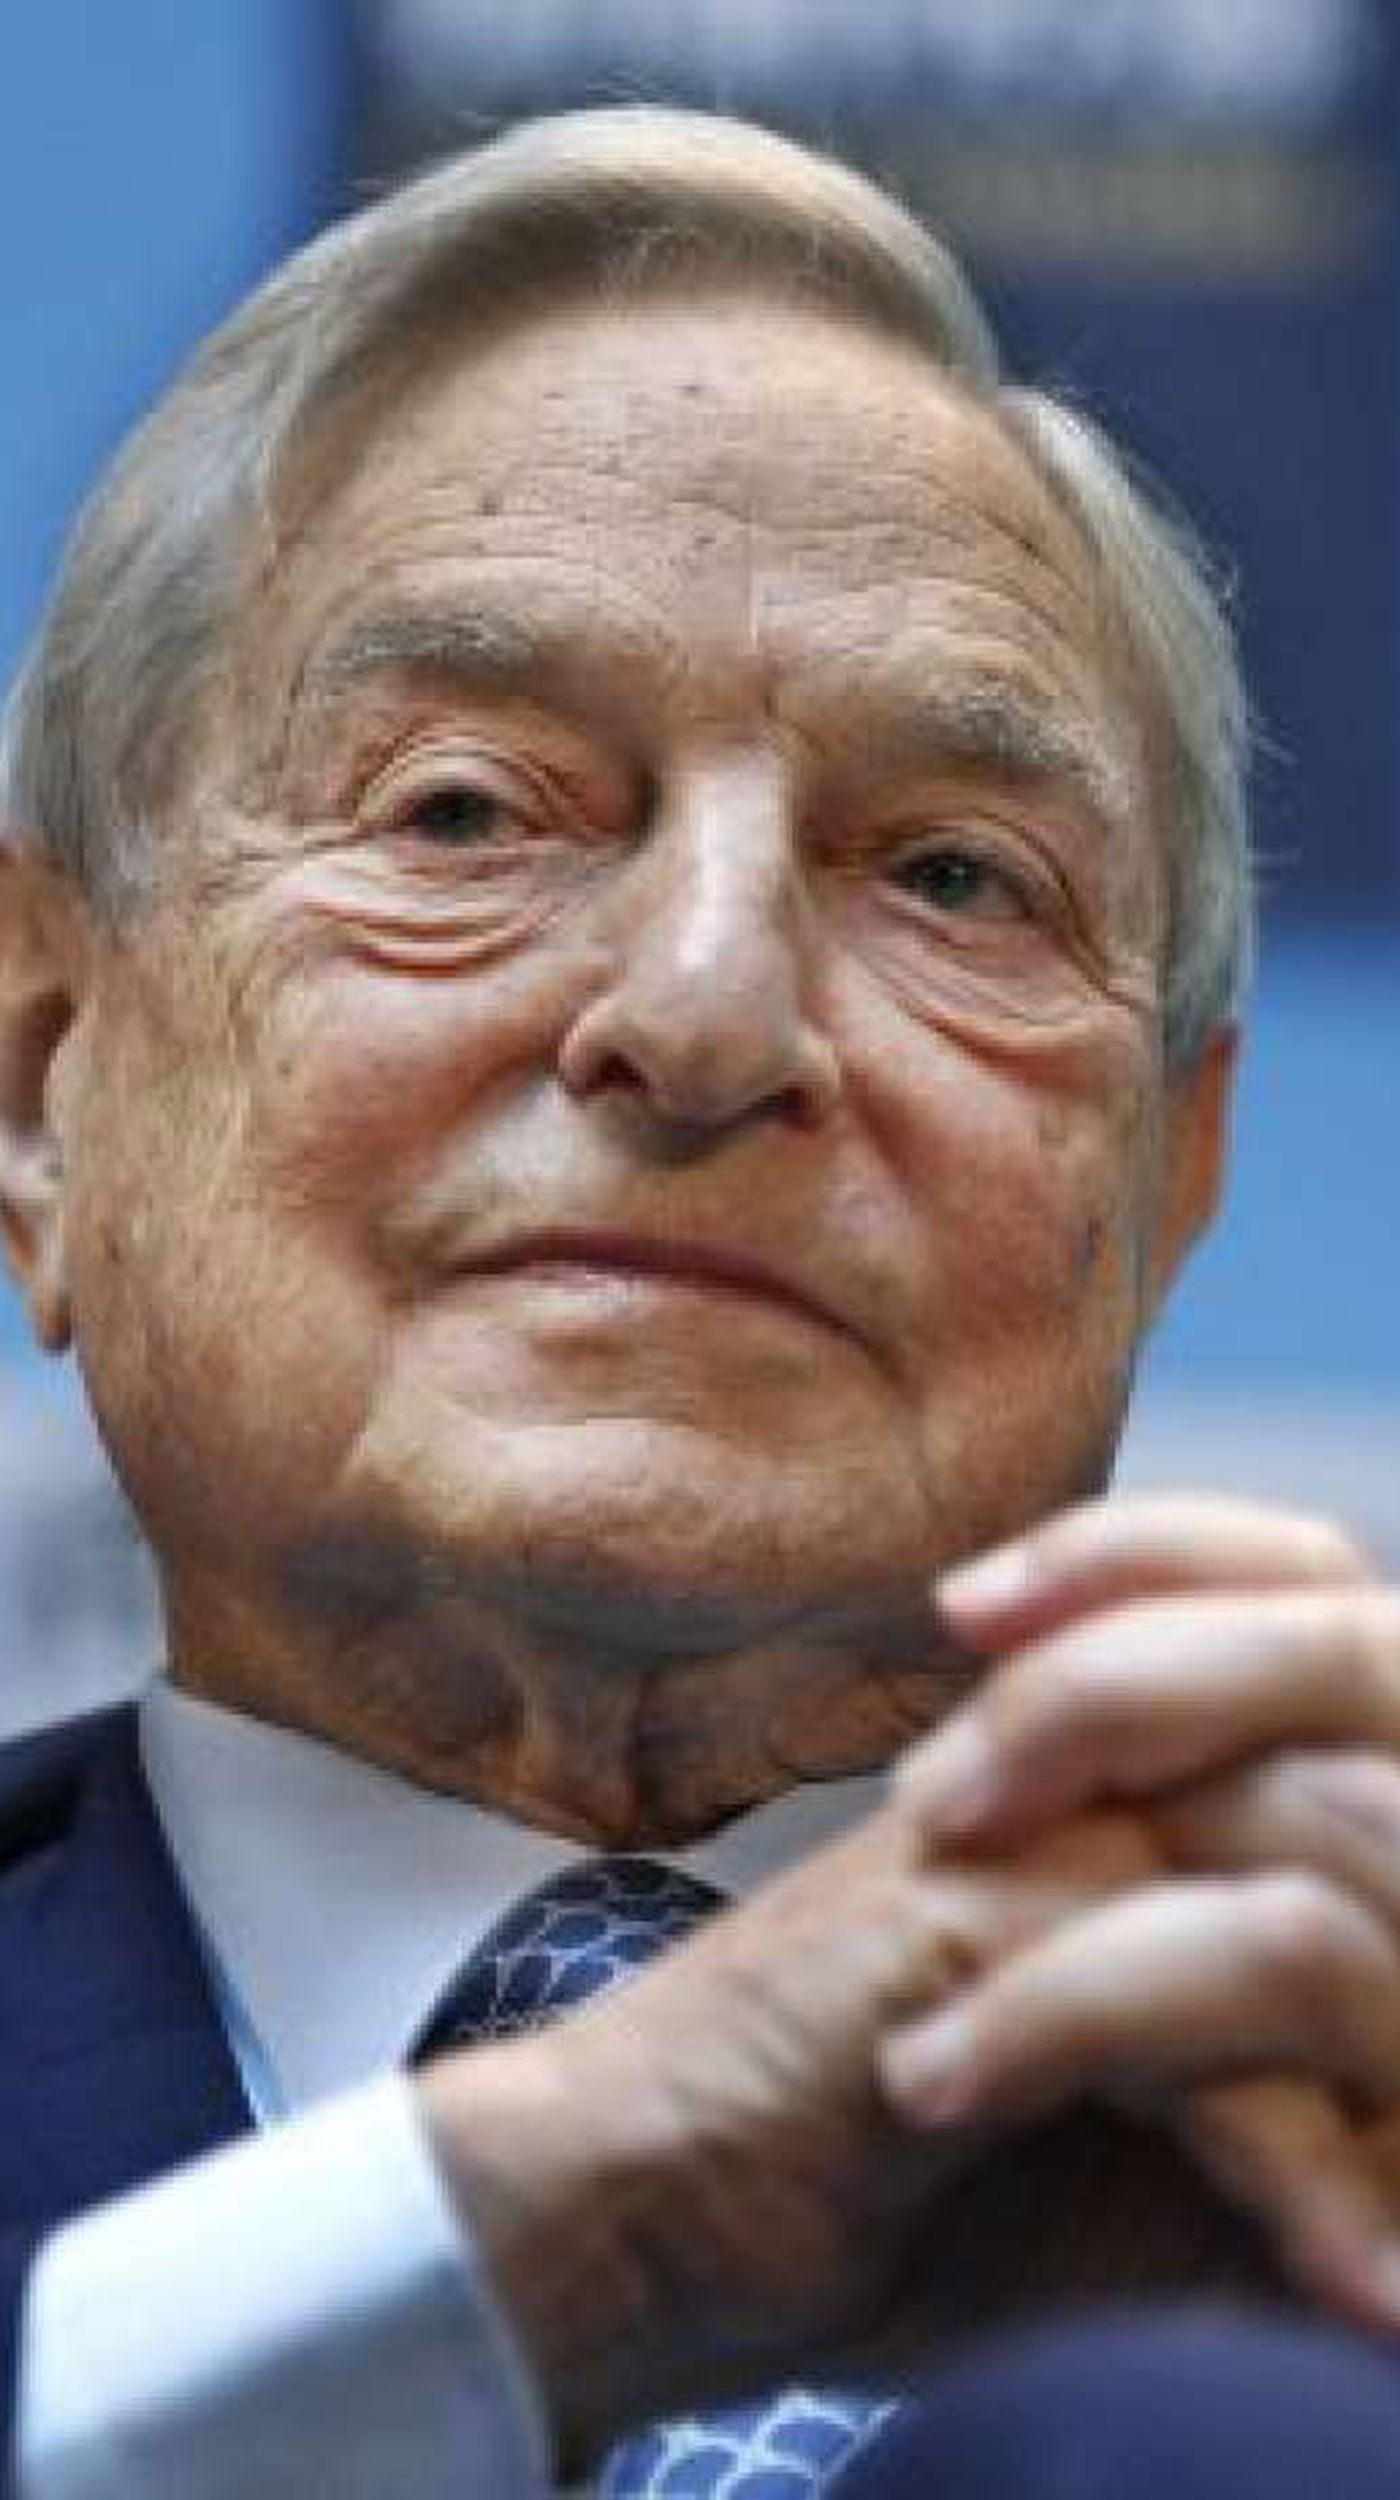 Meet George Soros, the man reviled by Ron DeSantis, Matt Gaetz, and so many others